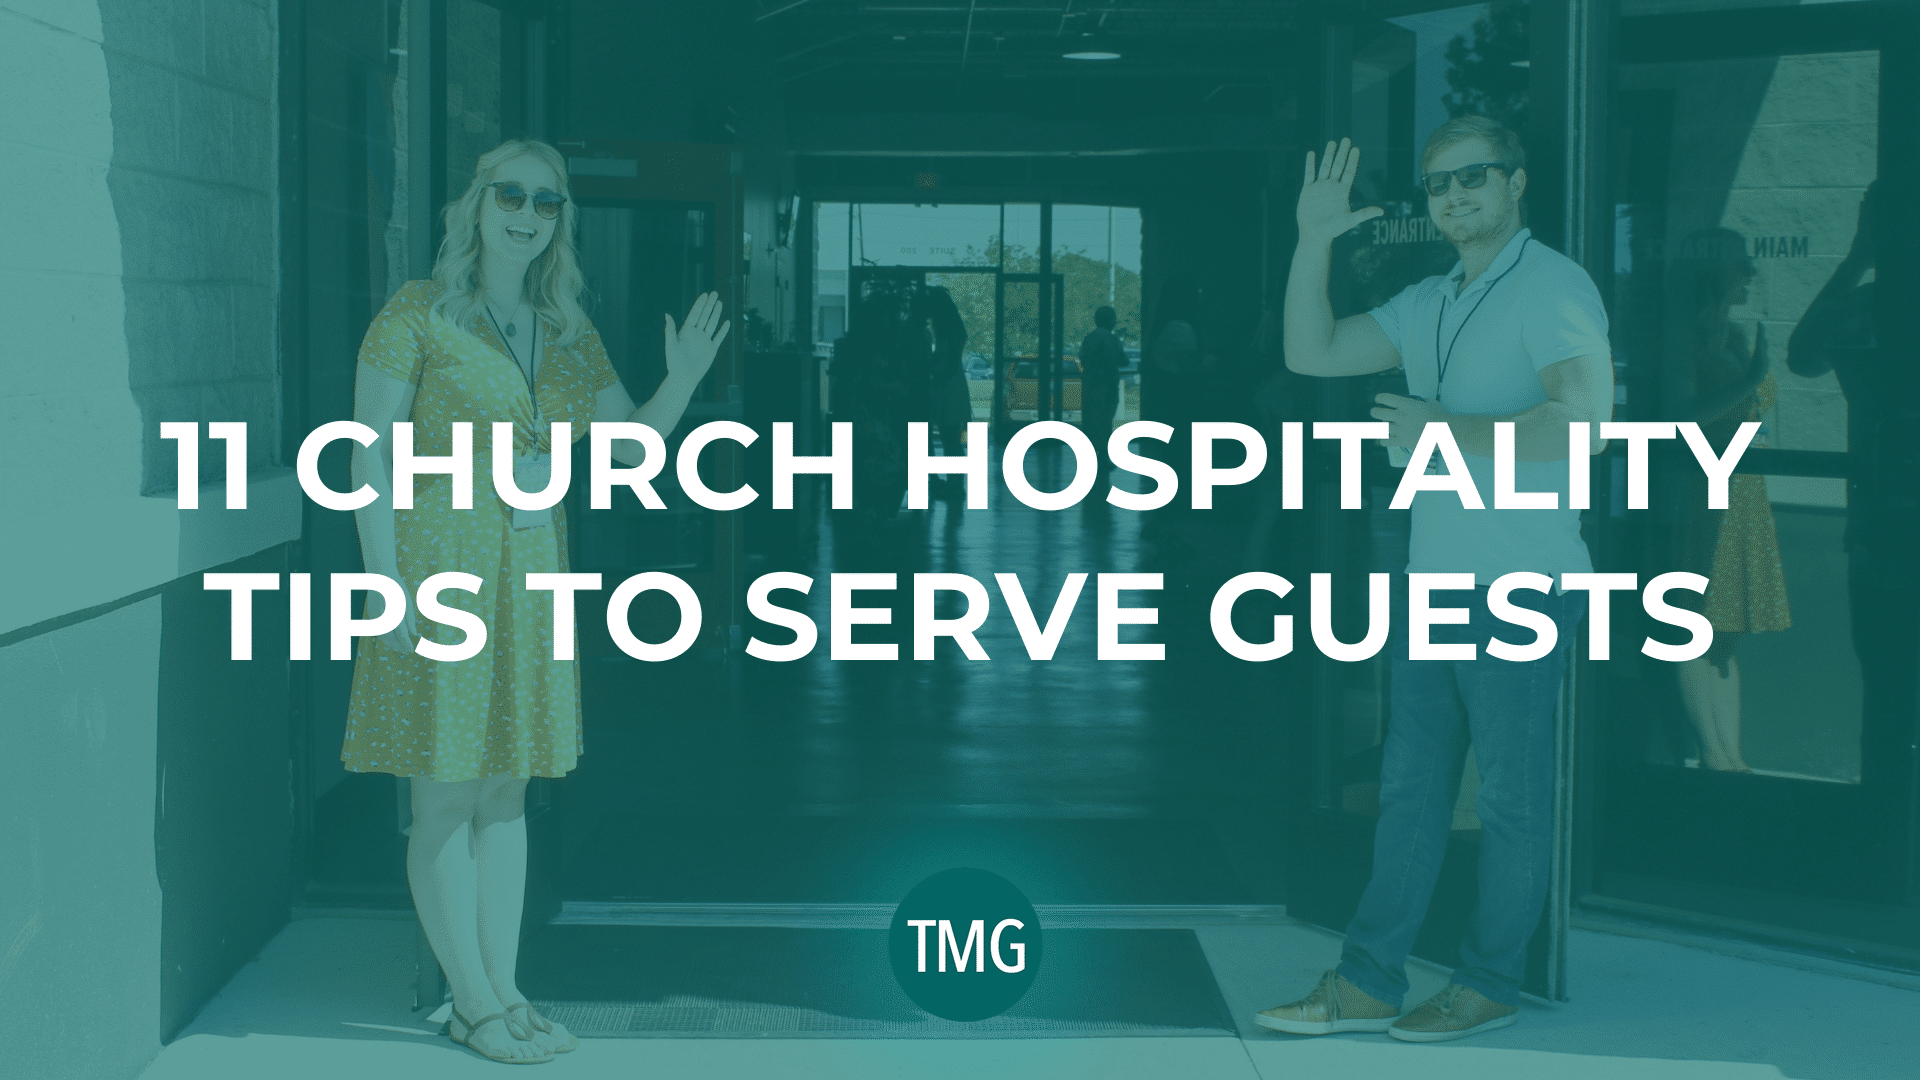 11-church-hospitality-tips-to-serve-guests